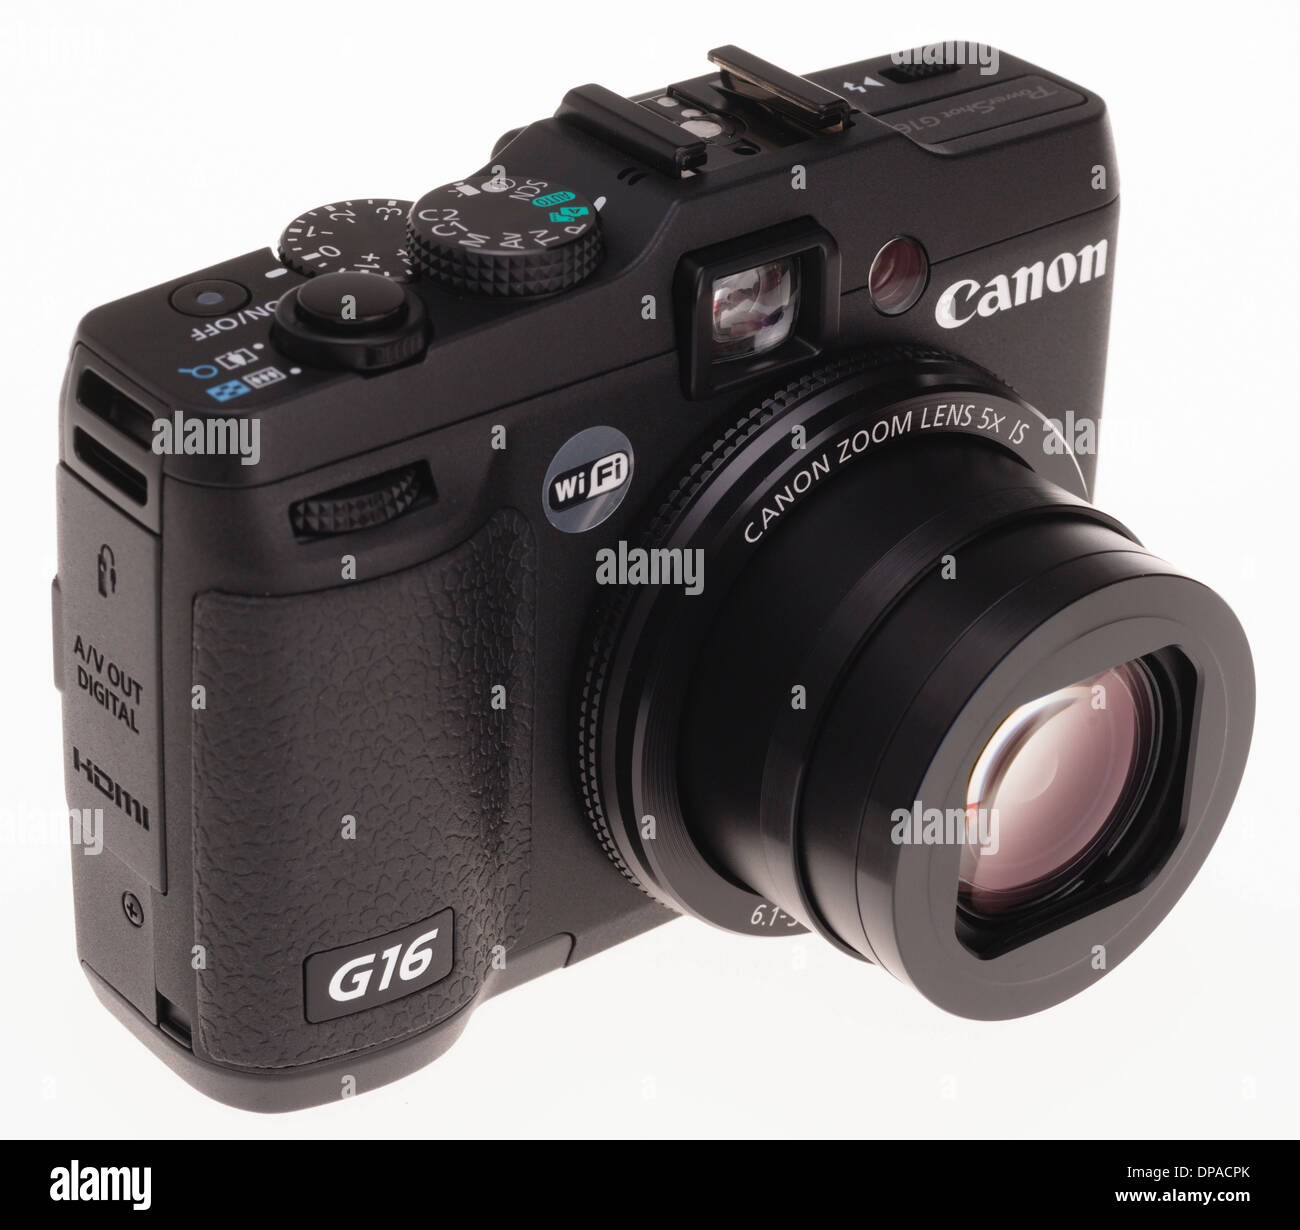 Digital photography equipment - Canon G16 compact camera with WiFi function Stock Photo